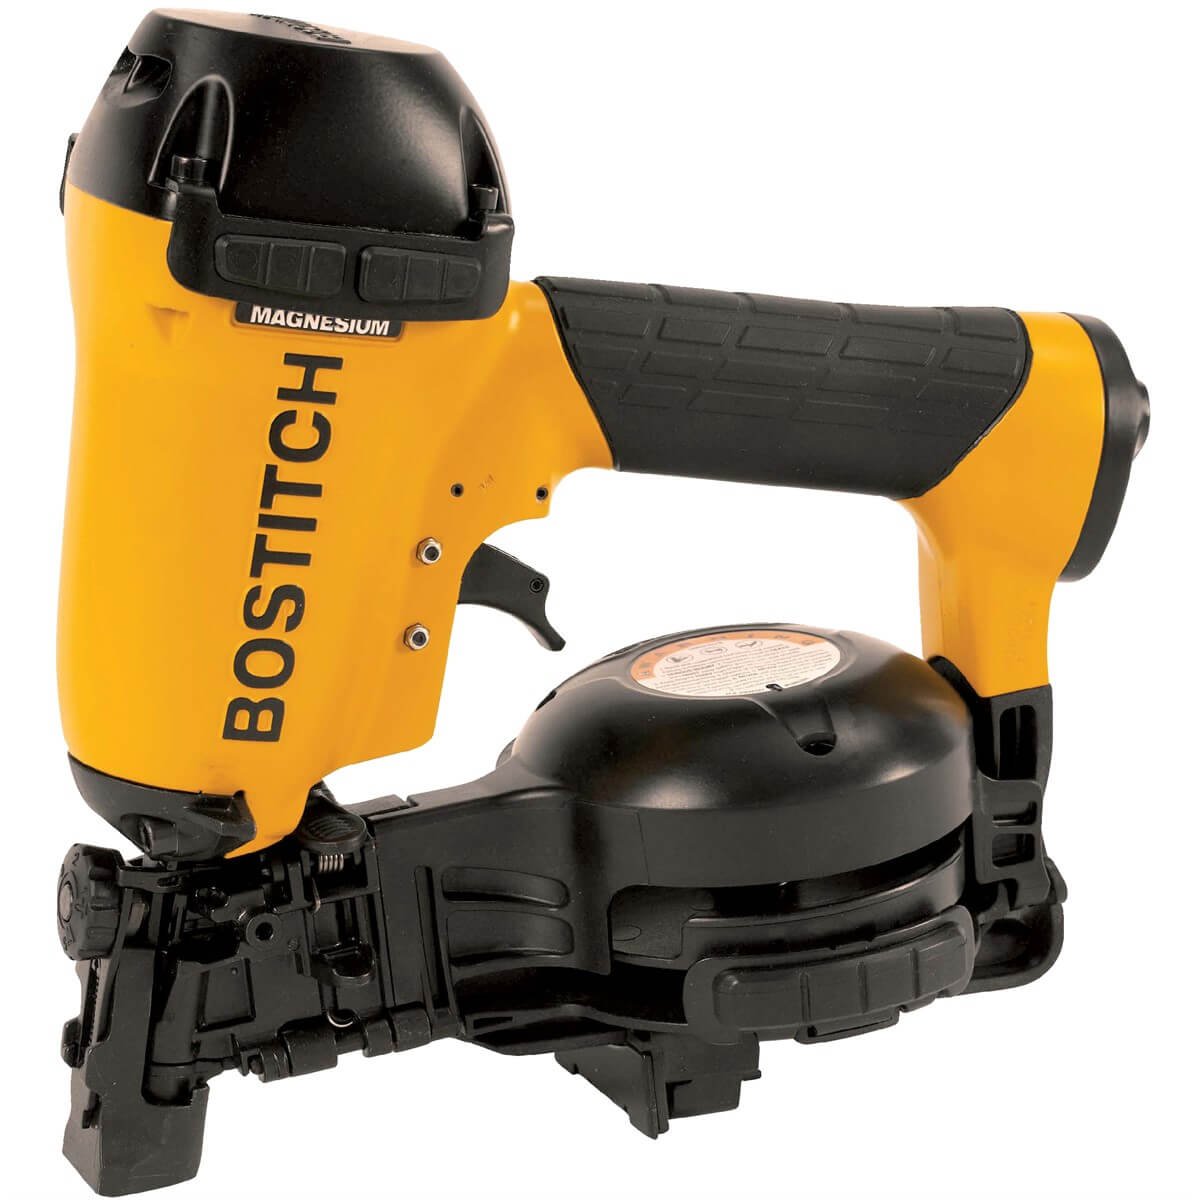 BOSTITCH RN46-1 3/4-Inch to 1-3/4-Inch Coil Roofing Nailer